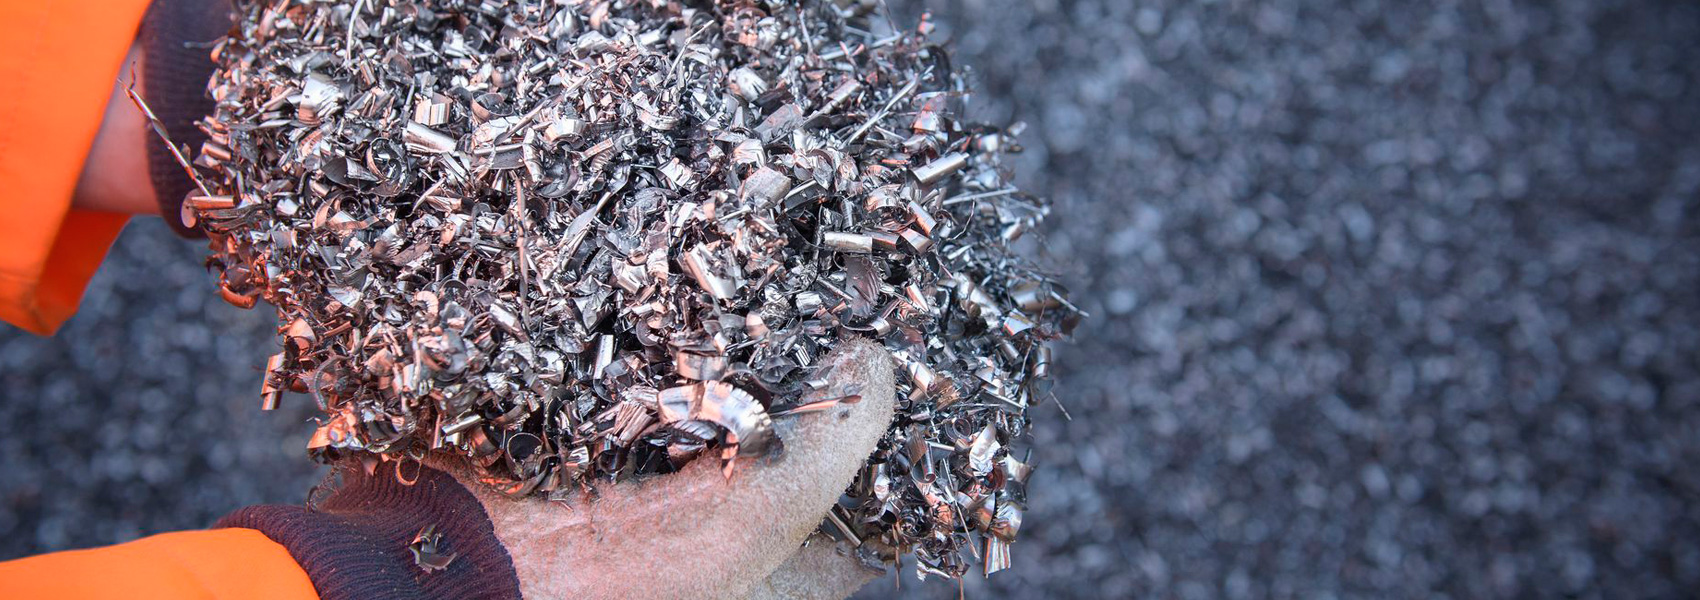 Different Types Of Metal Goods You Can Sell To Scrap Metal Companies